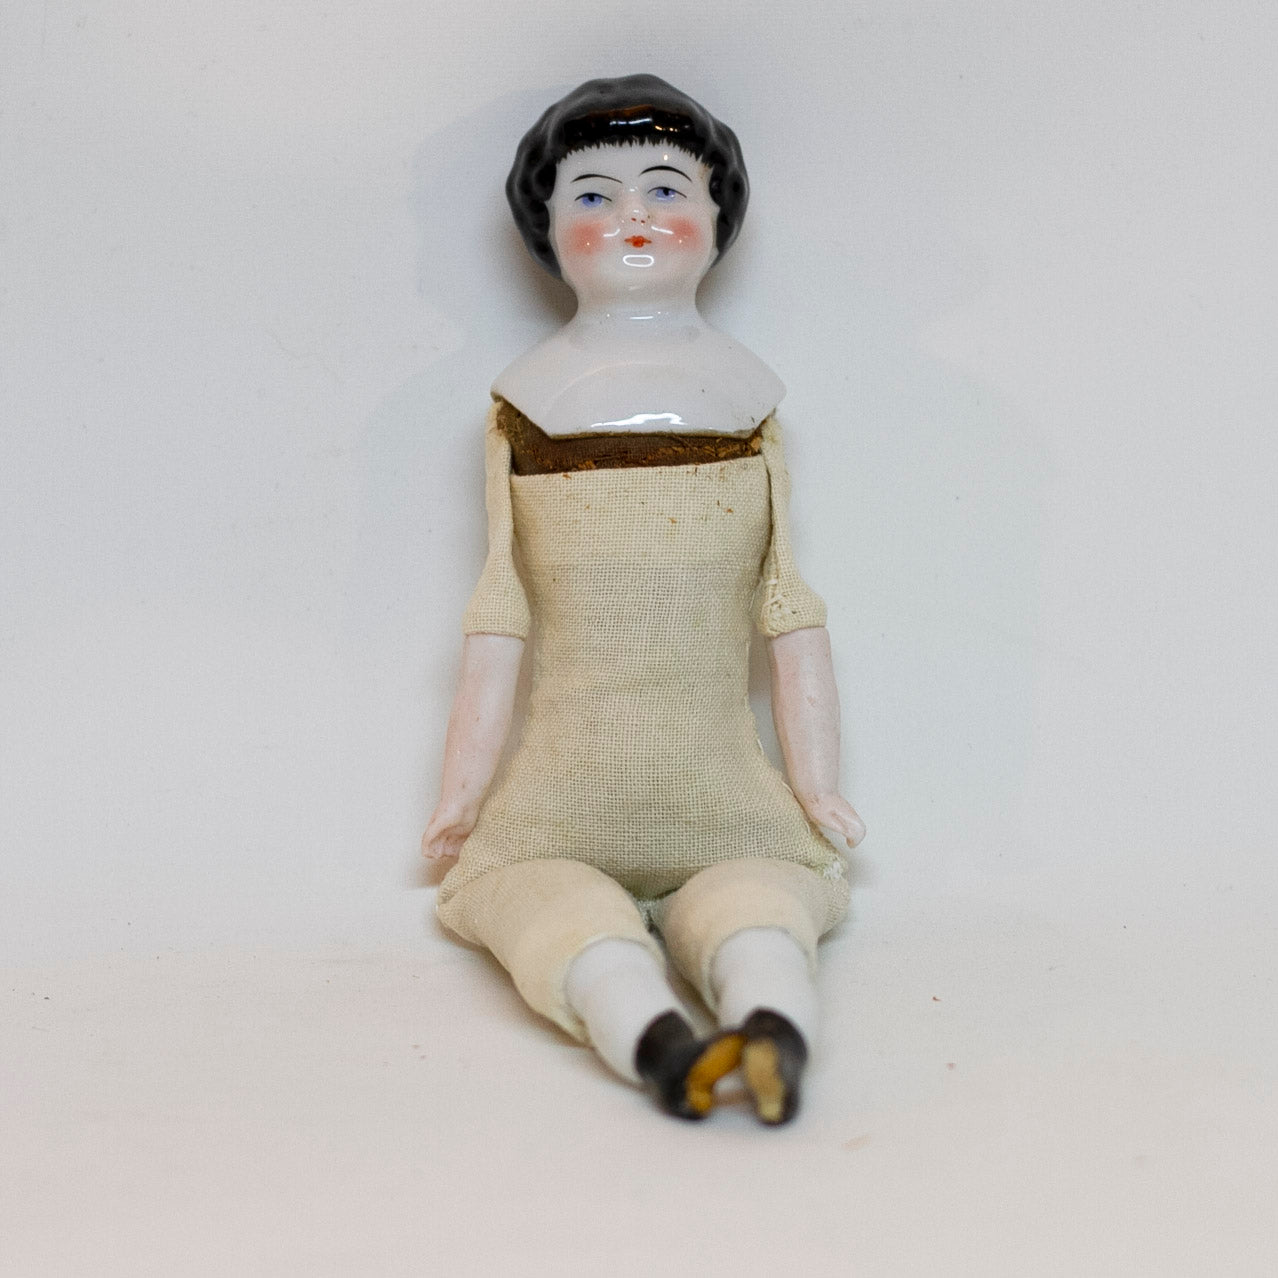 Antique CHINA SHOULDER DOLL HEAD DOLL 7 ¾” long; shoulder head measures 2" tall by 1 ⅝" wide at shoulders. Blue eyes, rosy cheeks, closed mouth and molded black curly hair with straight cut bangs. Bisque arms and legs, hand-sewn clean muslim body; stuffing appears original. No fractures. Likely German circa 1900. 